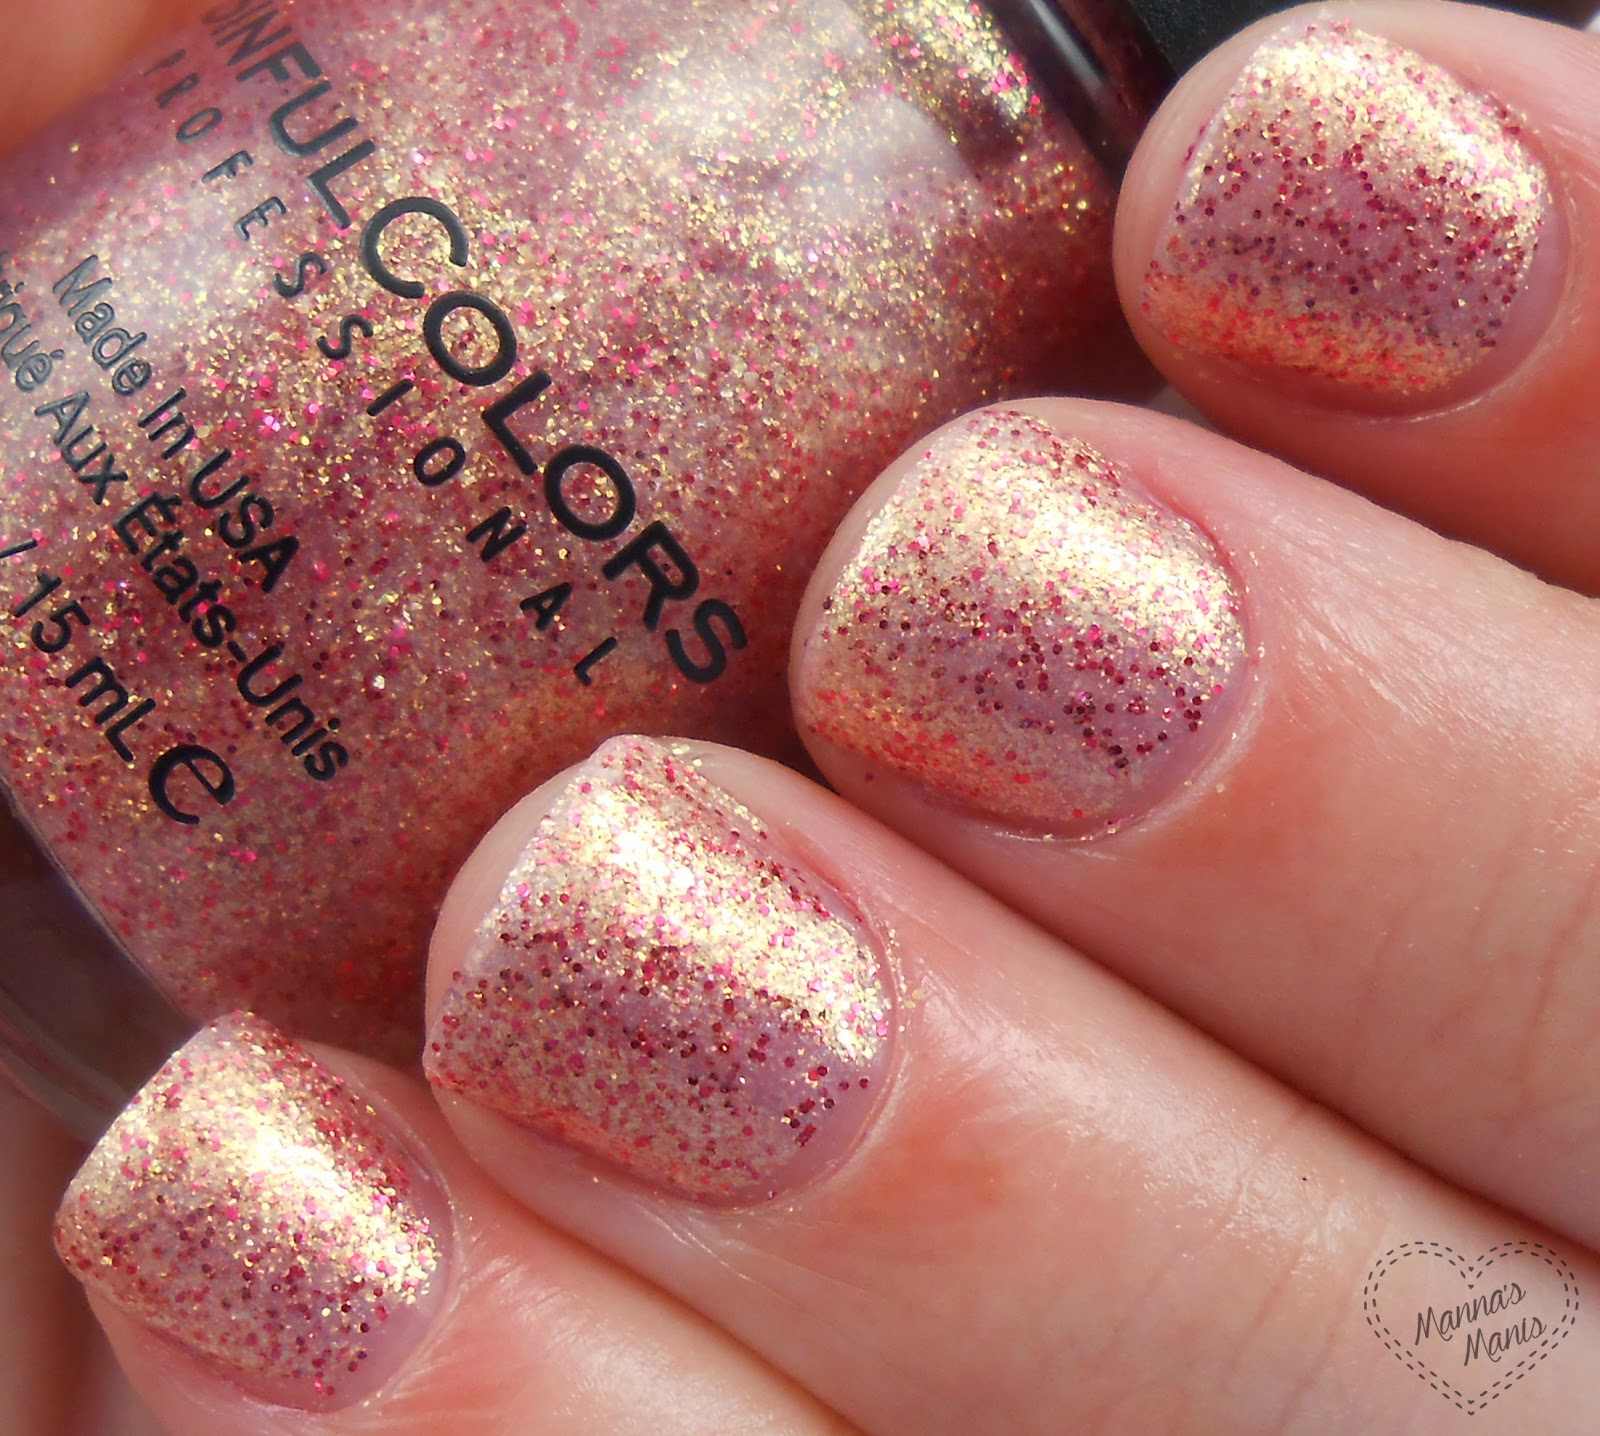 sinful colors glided, a shimmery gold and red nail polish